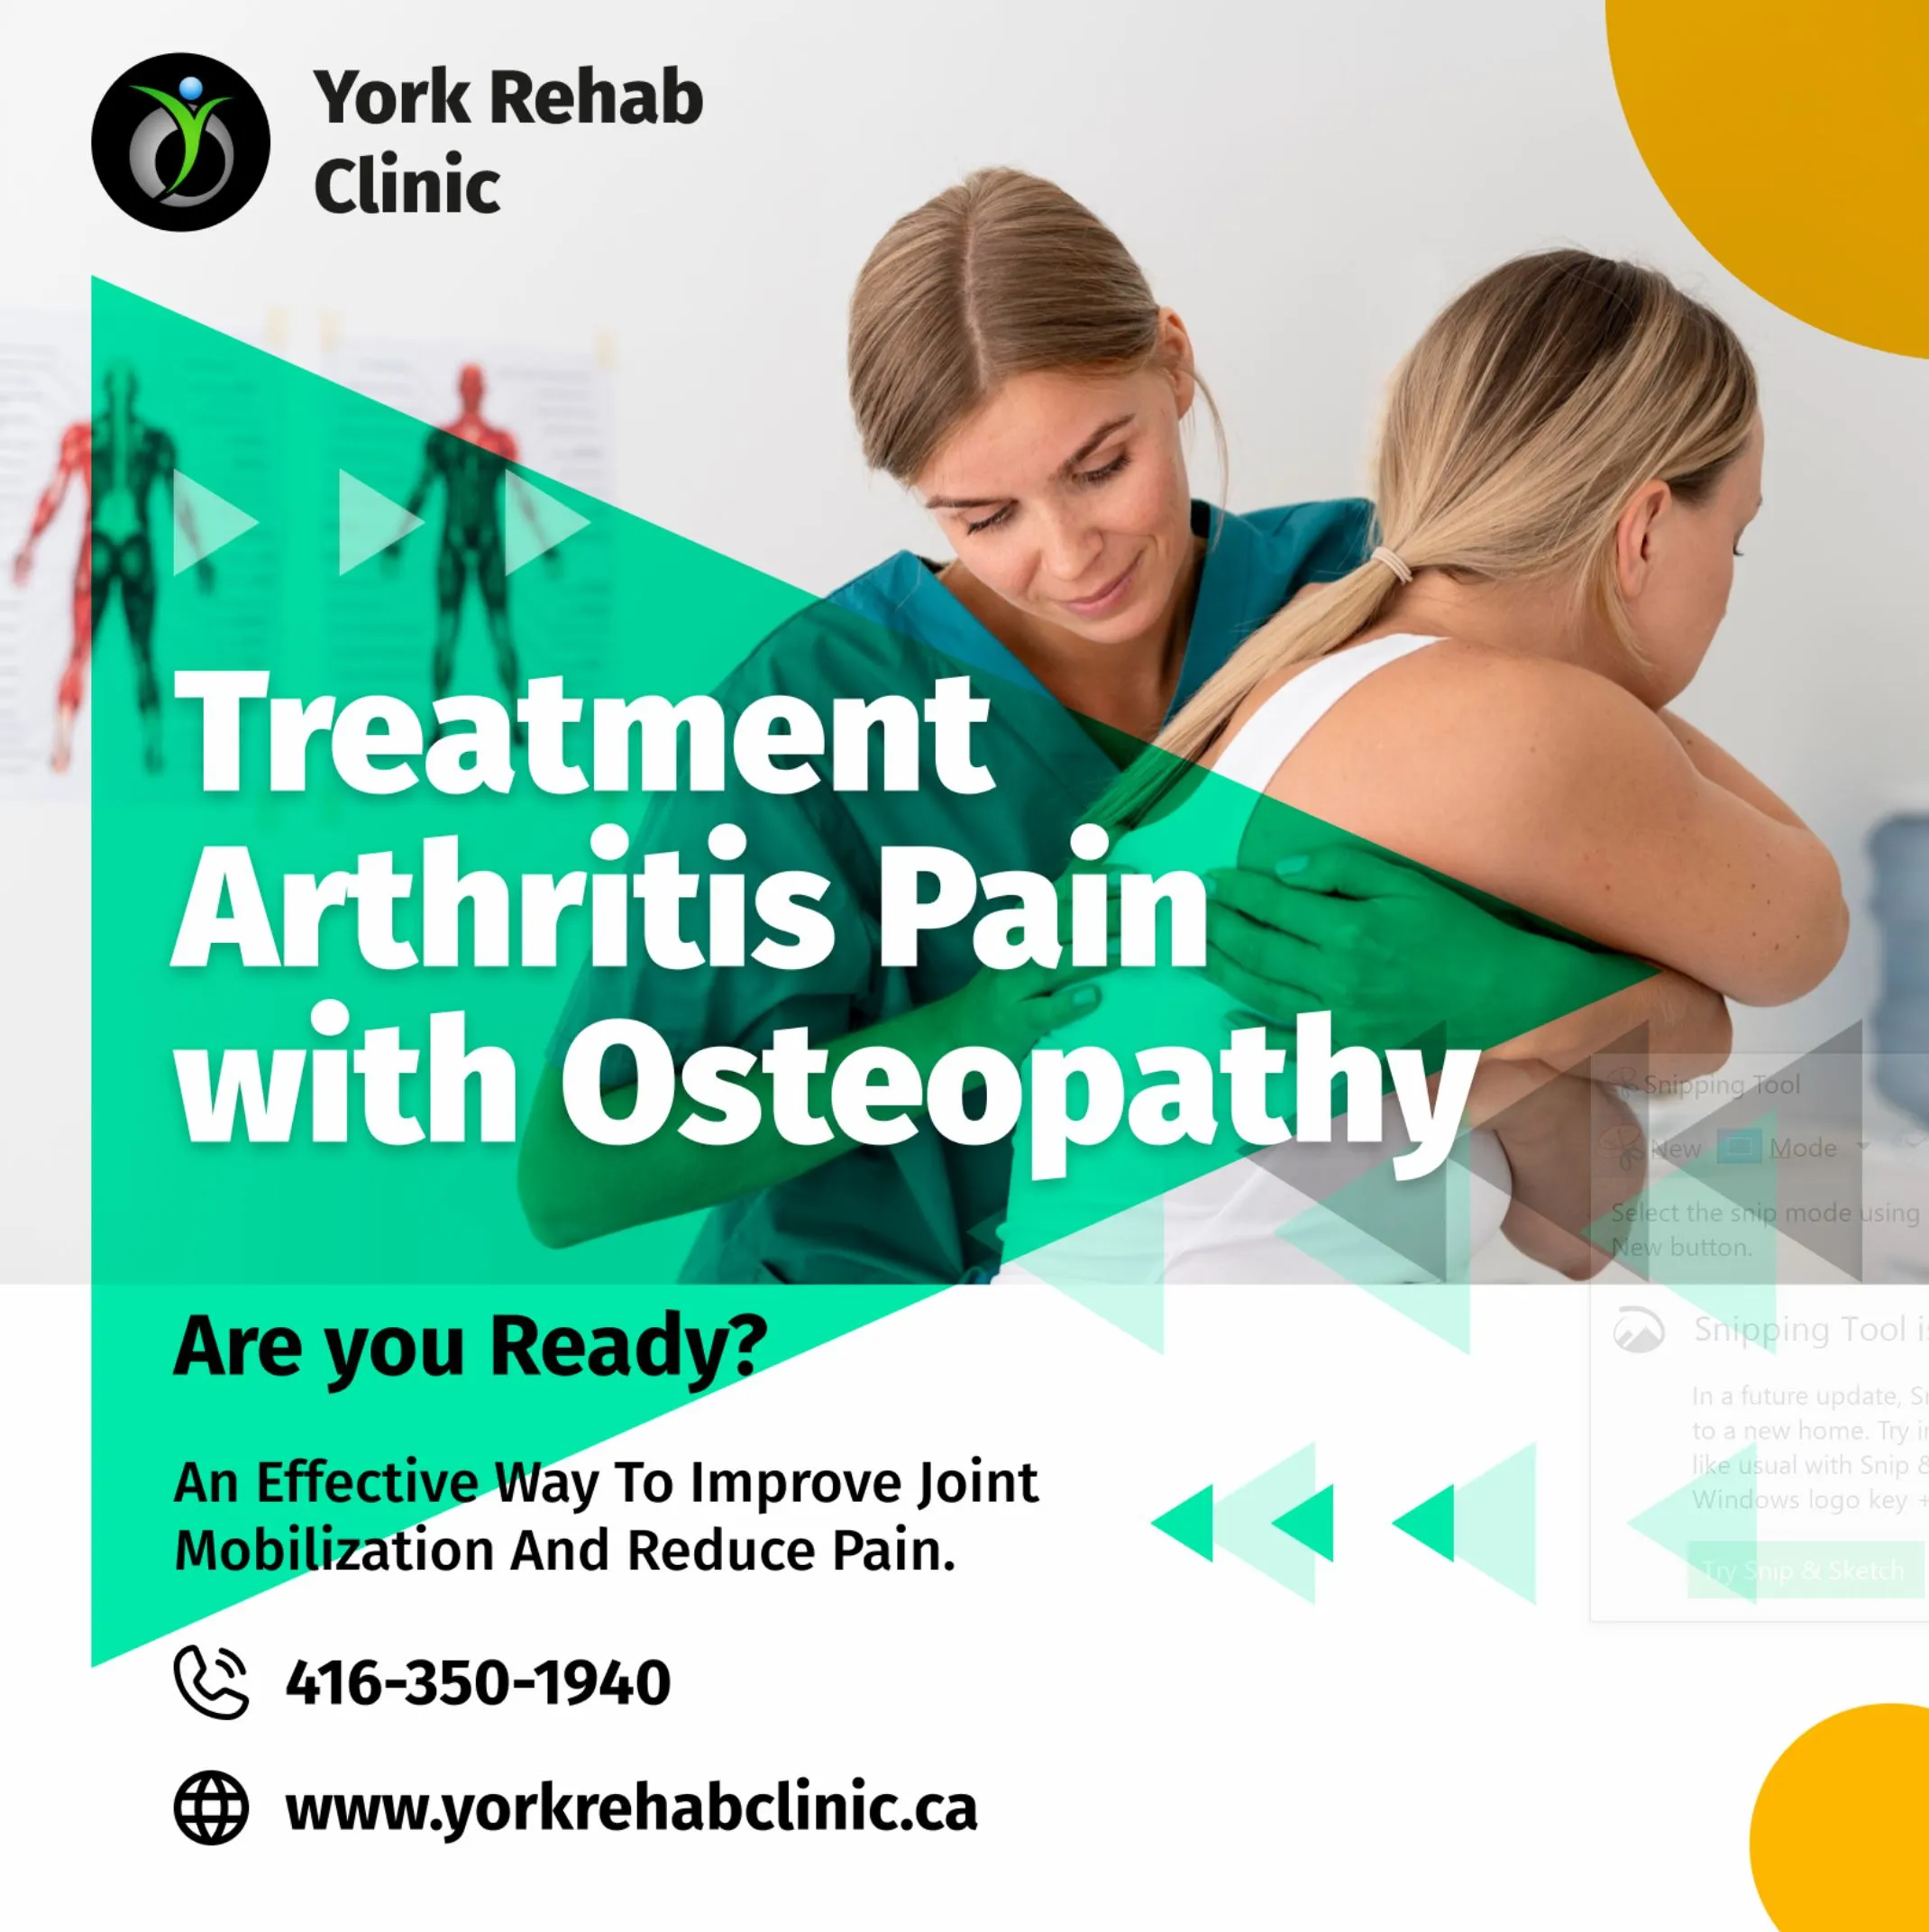 Managing Arthritis Symptoms with Osteopathy at York Rehab Clinic